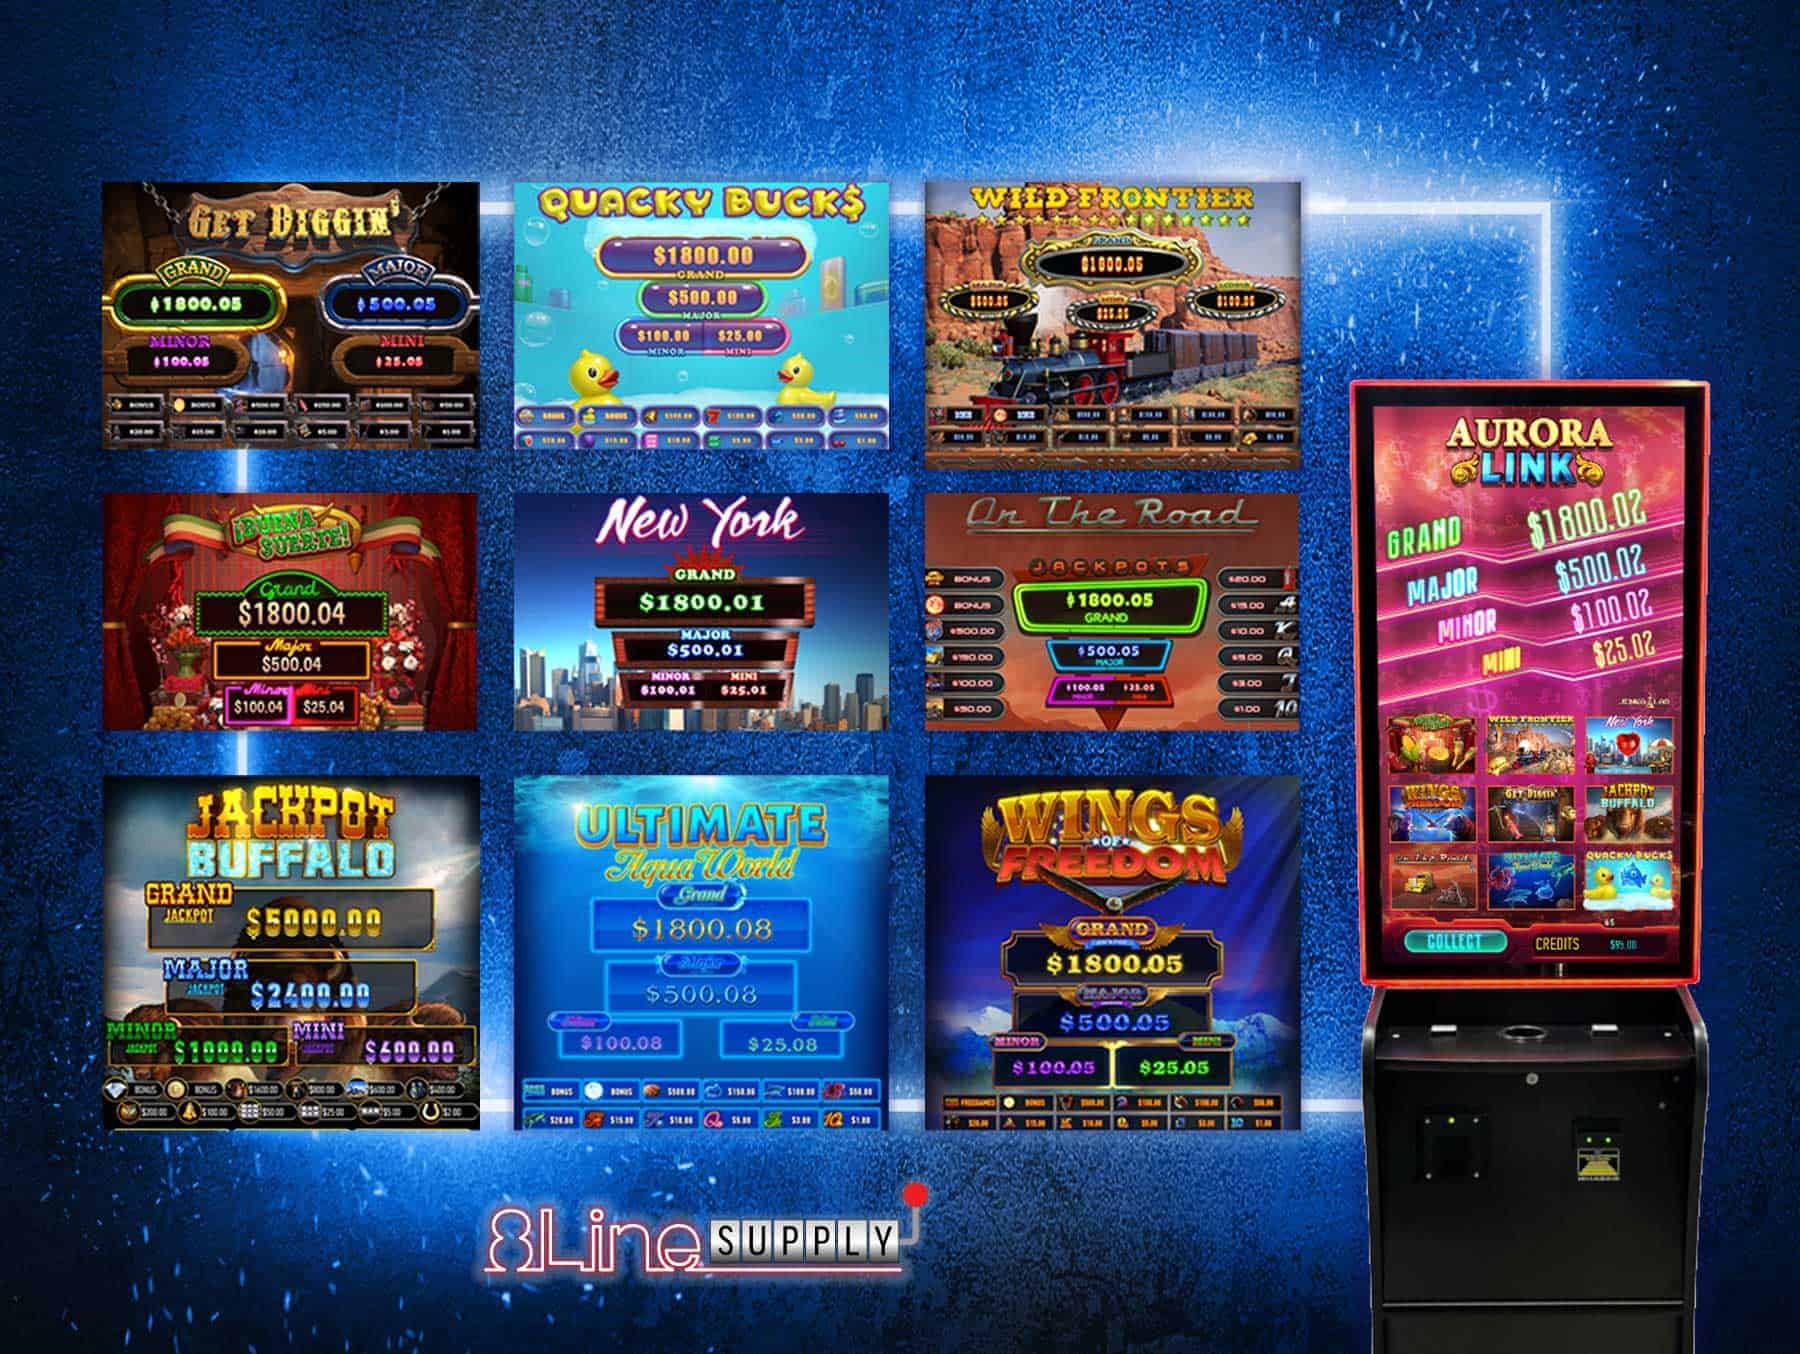 Promotional Offers and Bonuses at Indian Online Casinos Etics and Etiquette